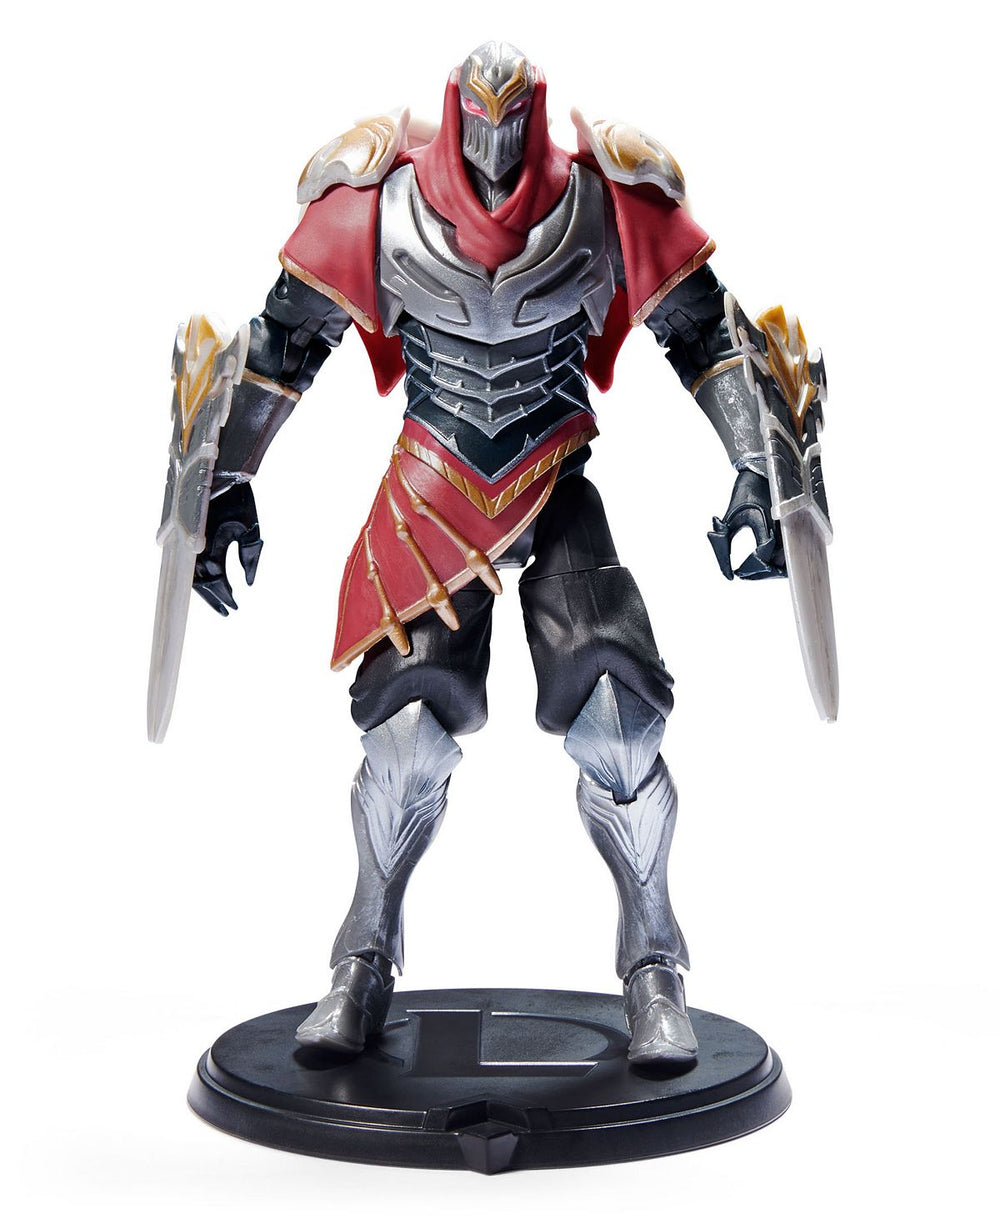 League of Legends Collector Series 6" Zed Action Figure with Accessories